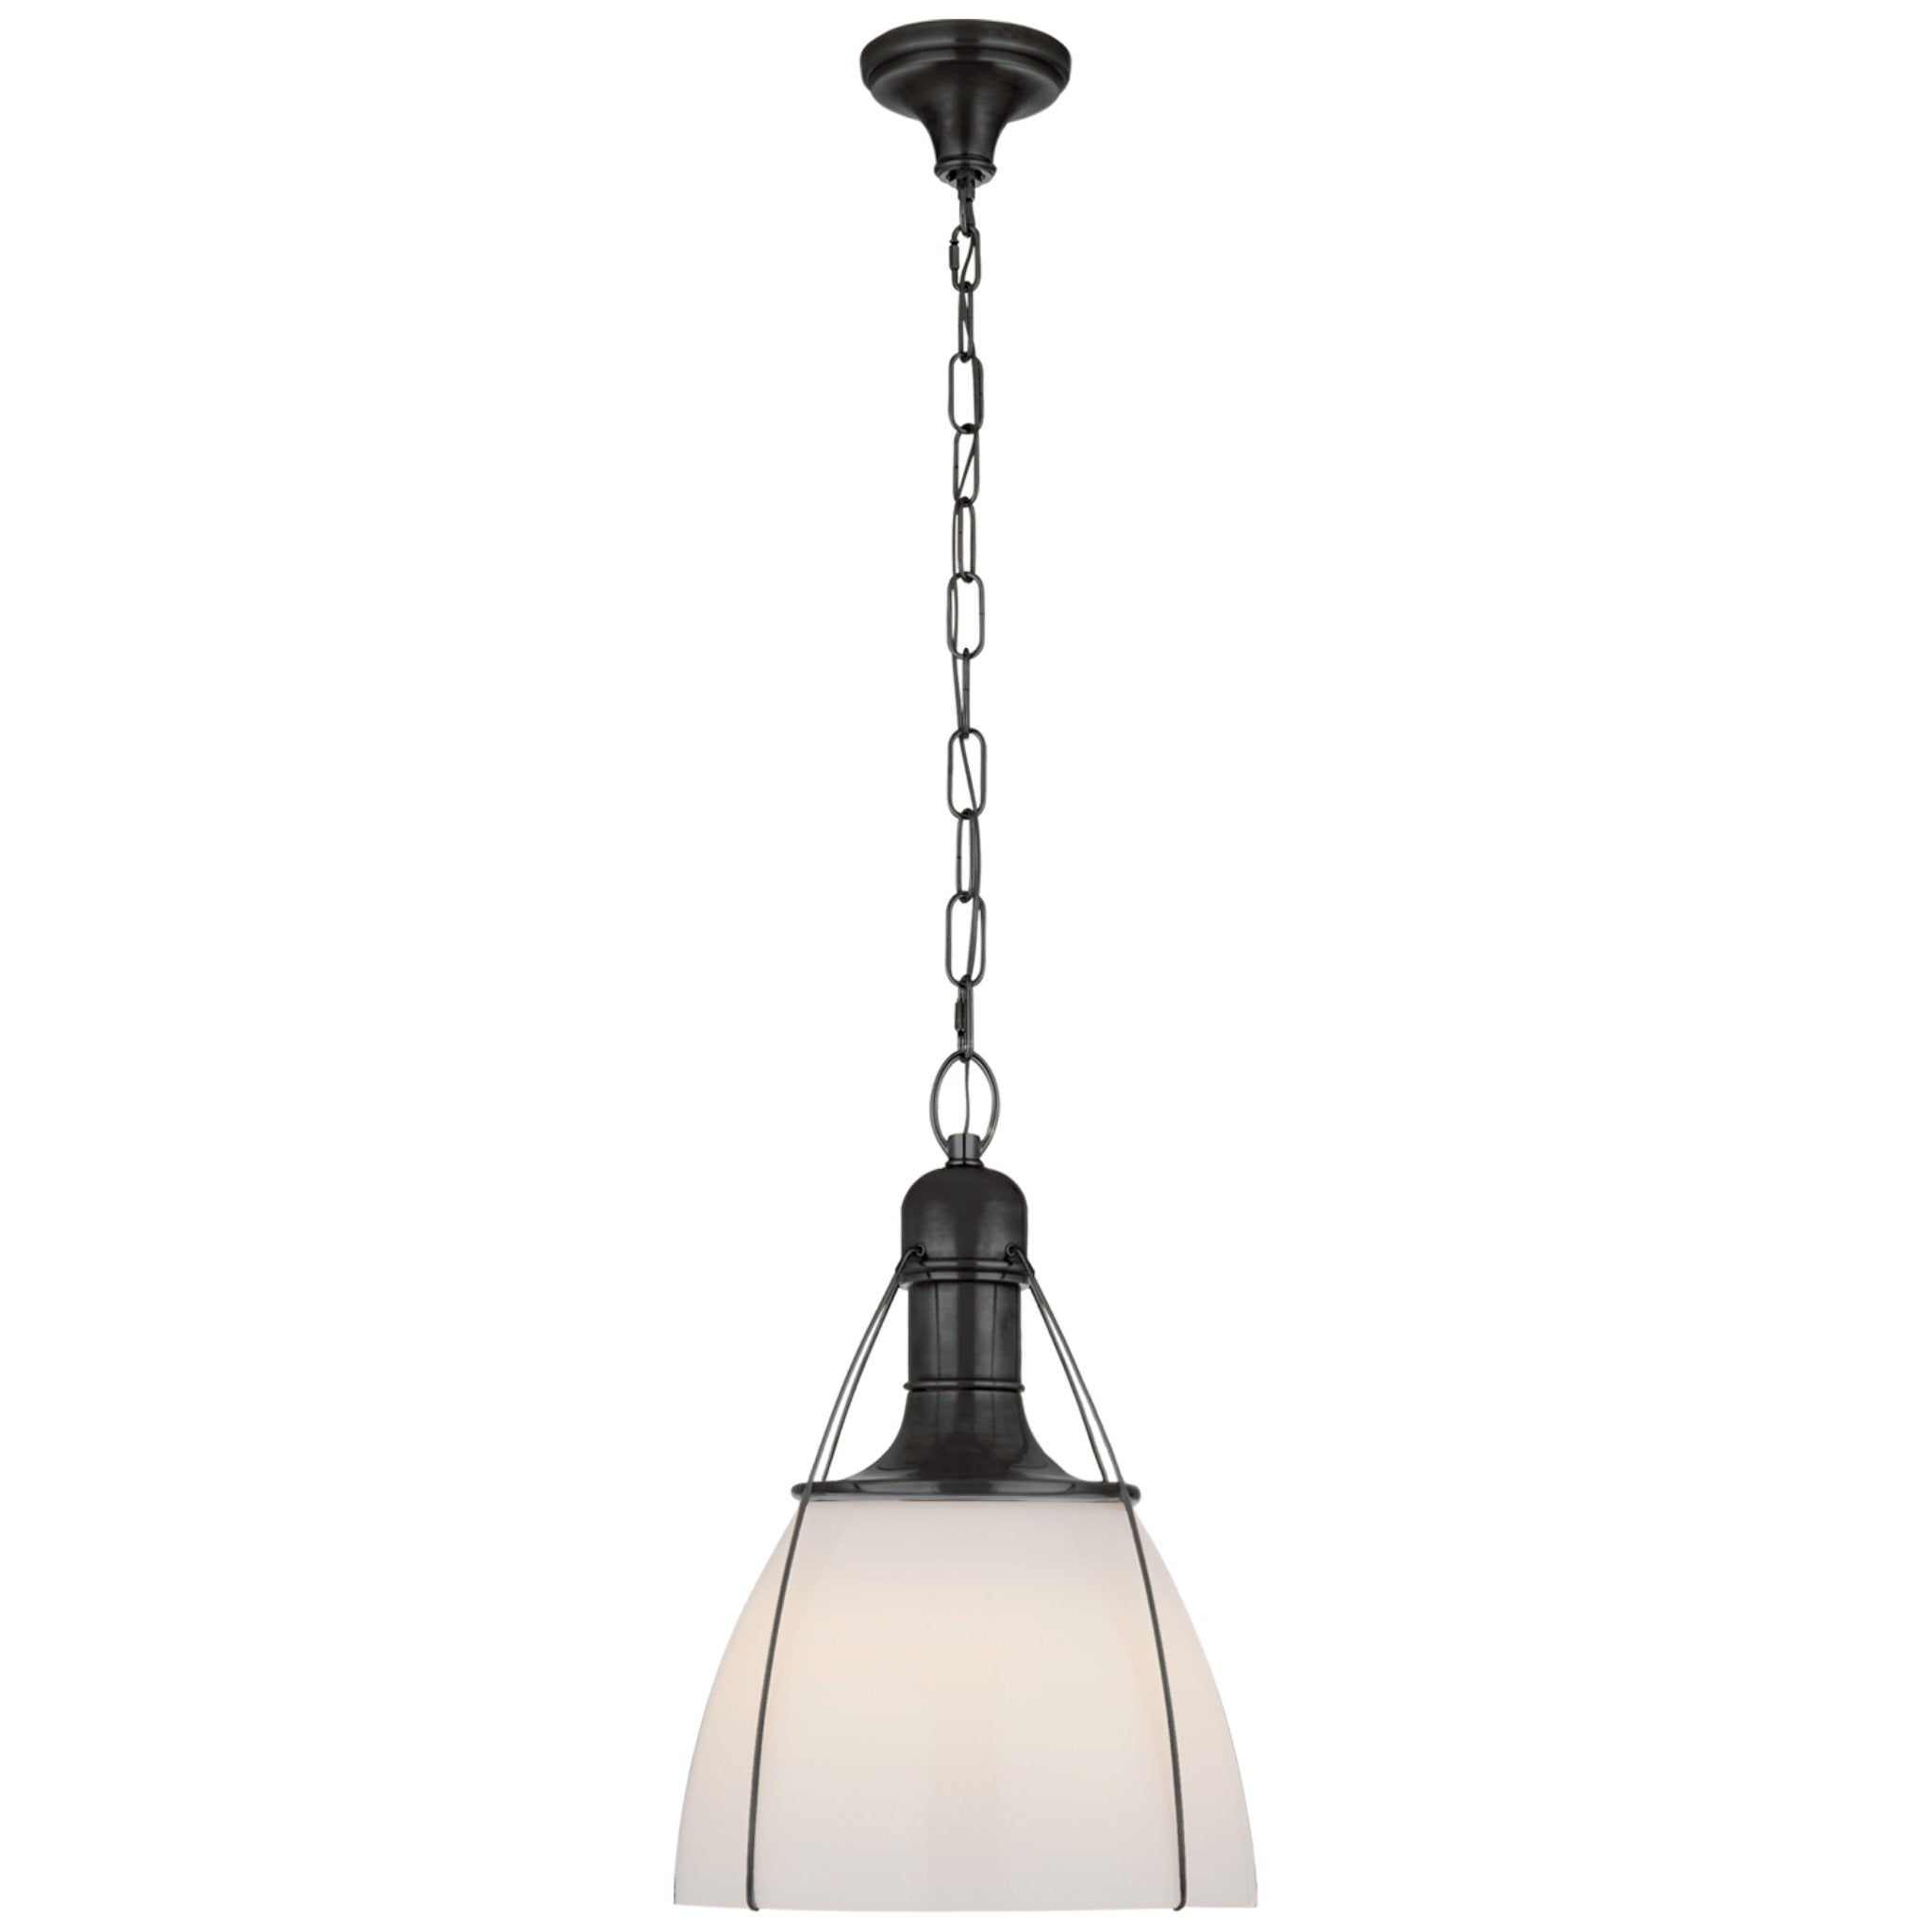 Chapman & Myers Prestwick 18" Pendant in Bronze with White Glass